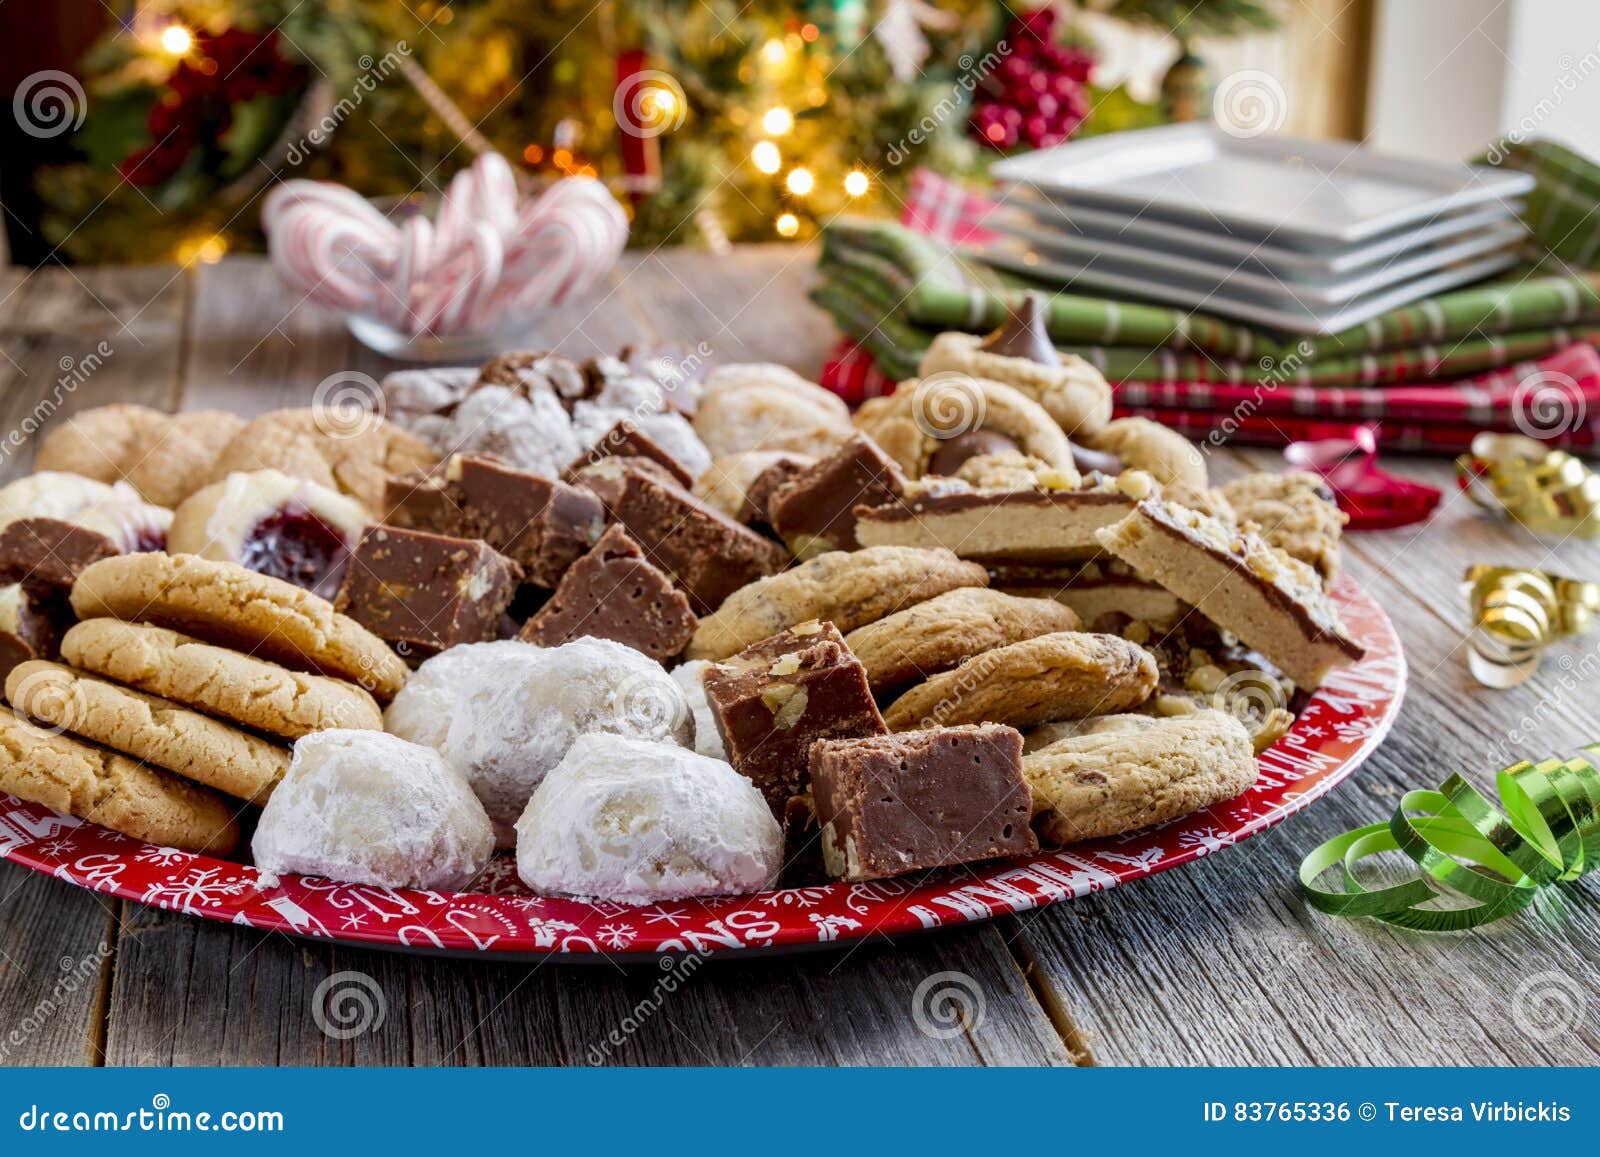 Holiday Cookie Tray is an assortment of several cookies